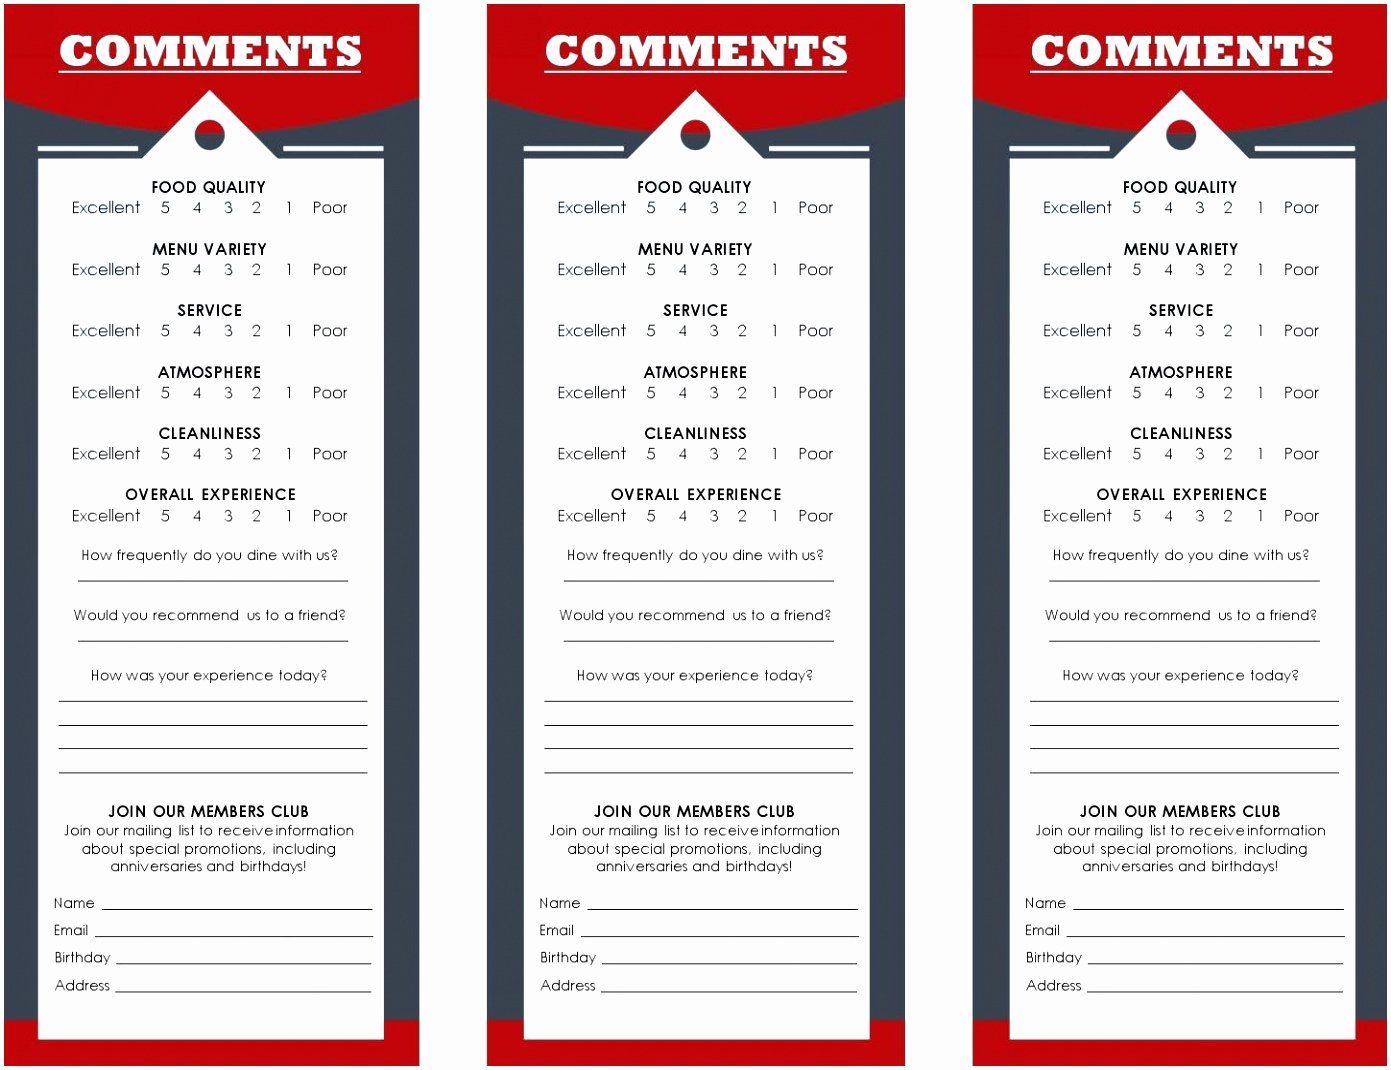 Restaurant Comment Card Template Beautiful 9 Restaurant Ment Card Template Vrtwi